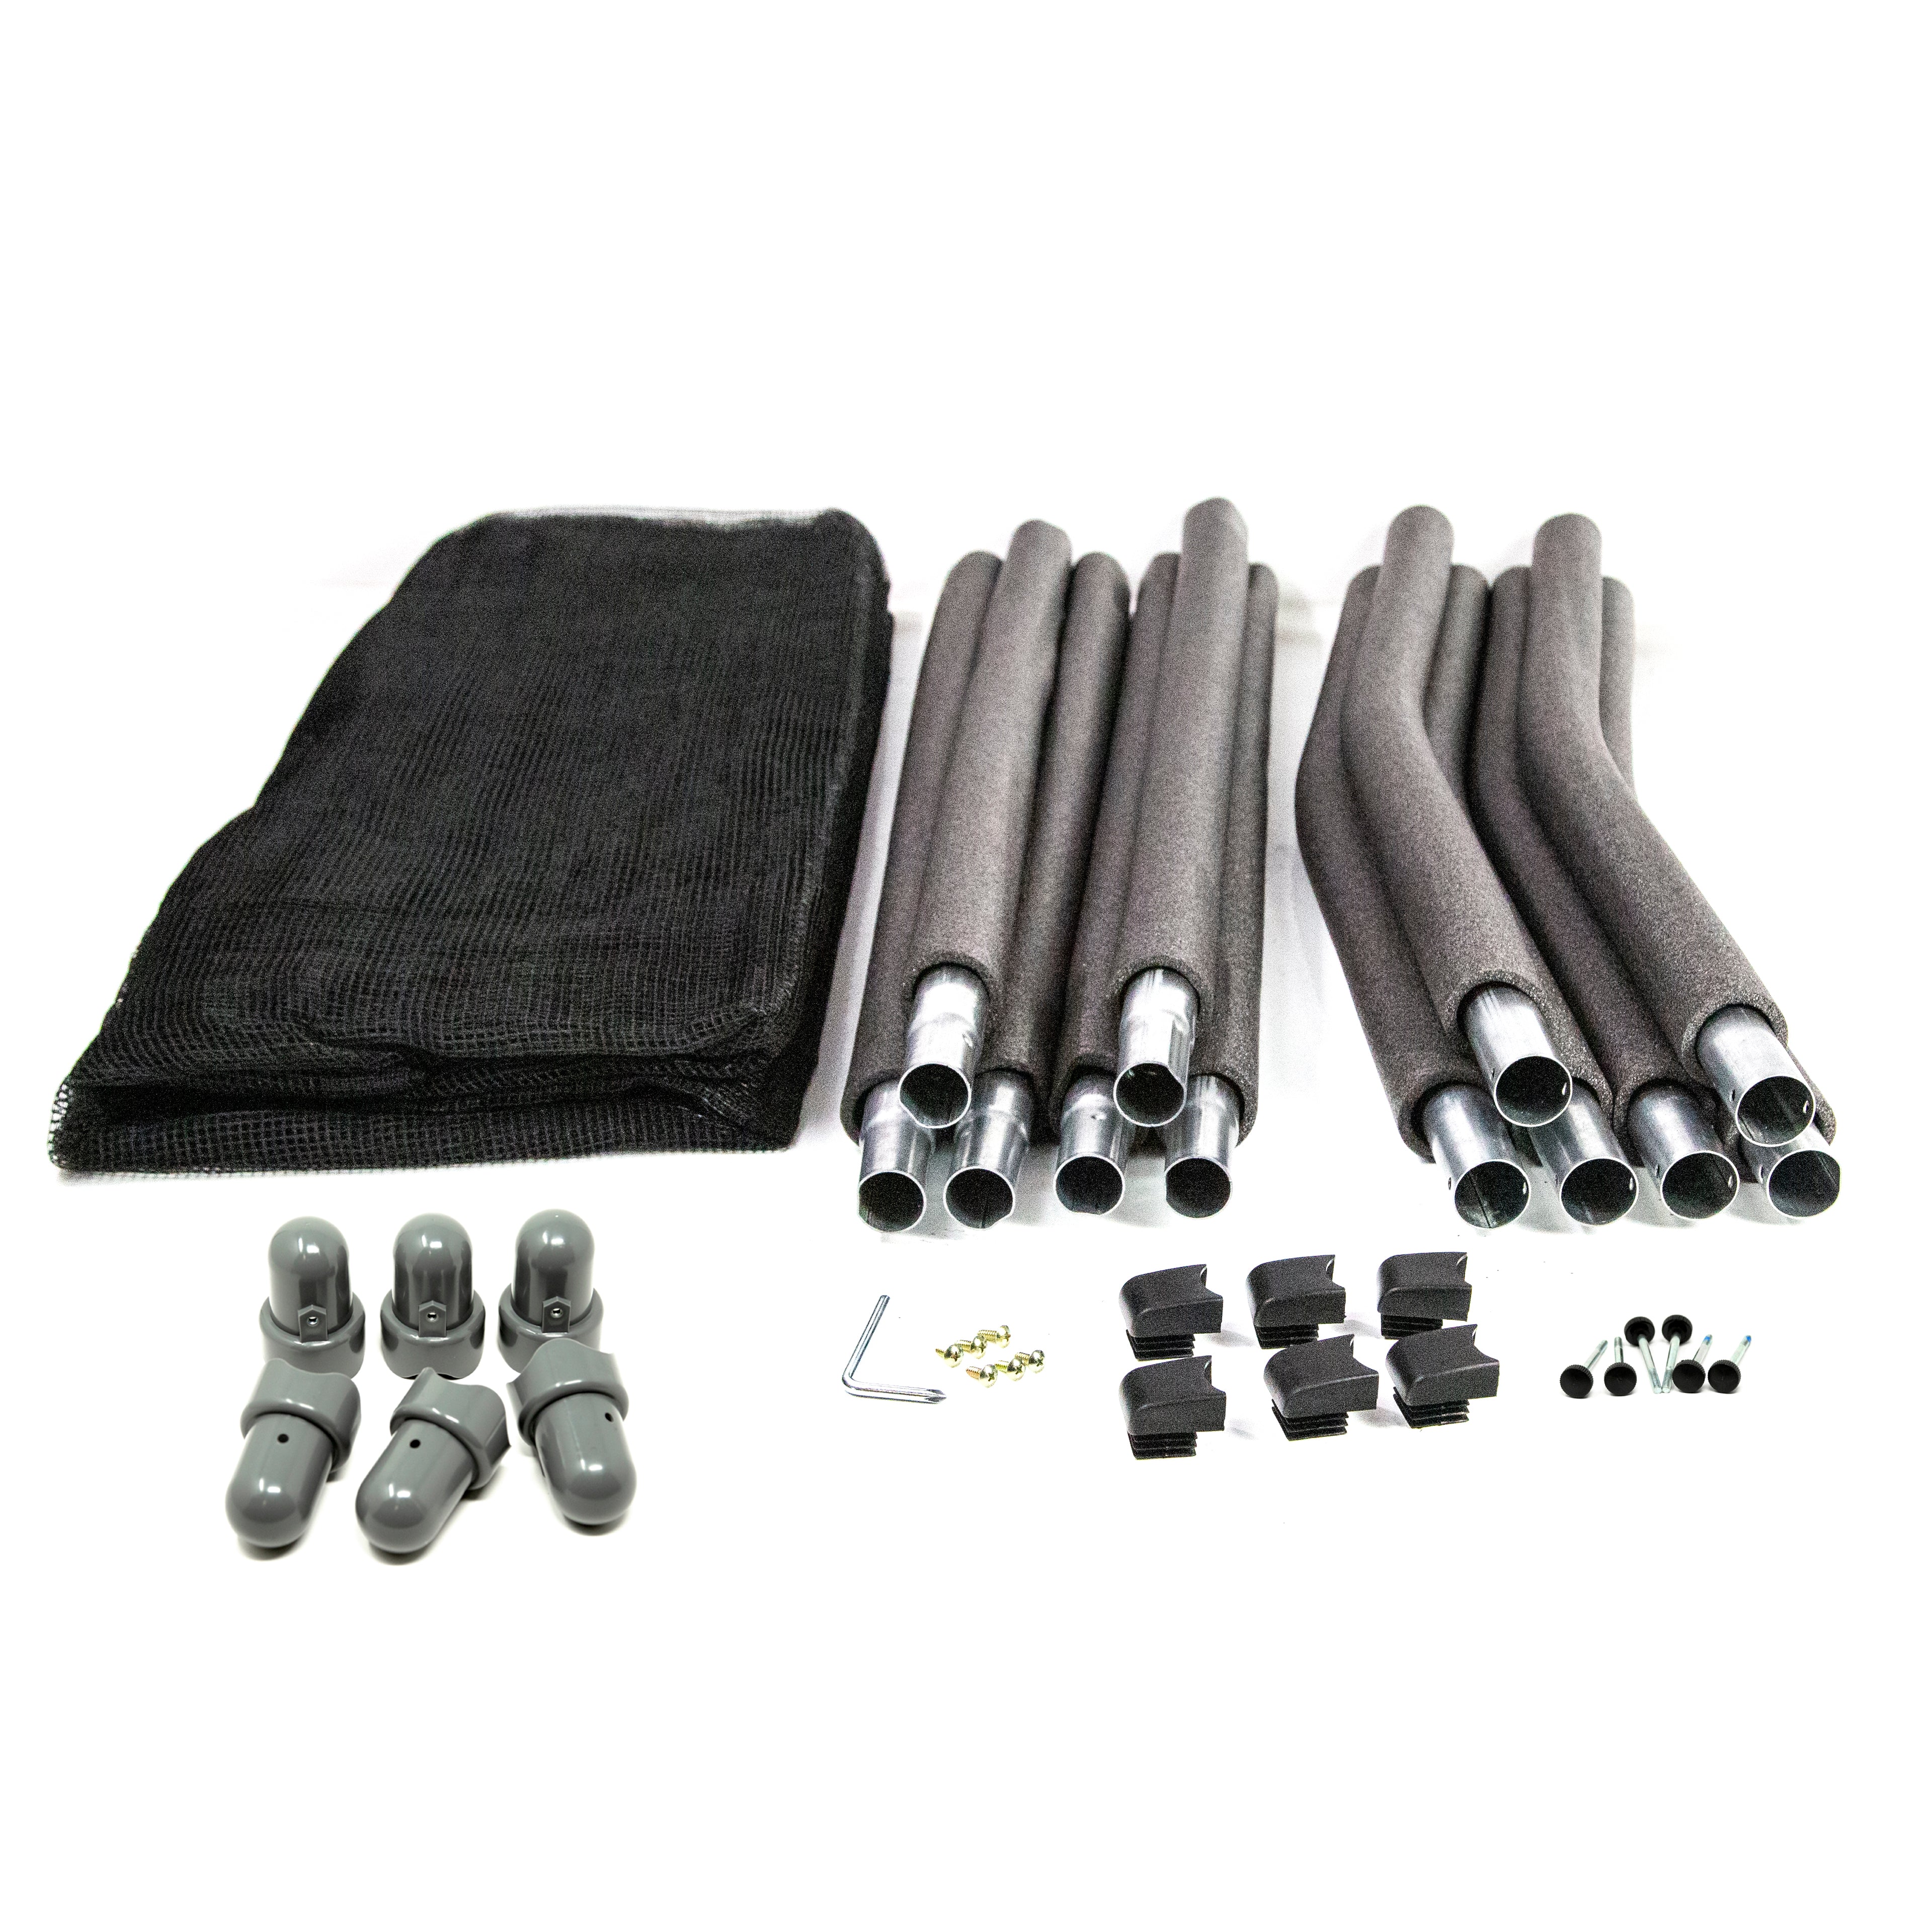 Enclosure kit for 15-foot round trampolines includes enclosure net, enclosure poles, pole caps, and necessary hardware. 